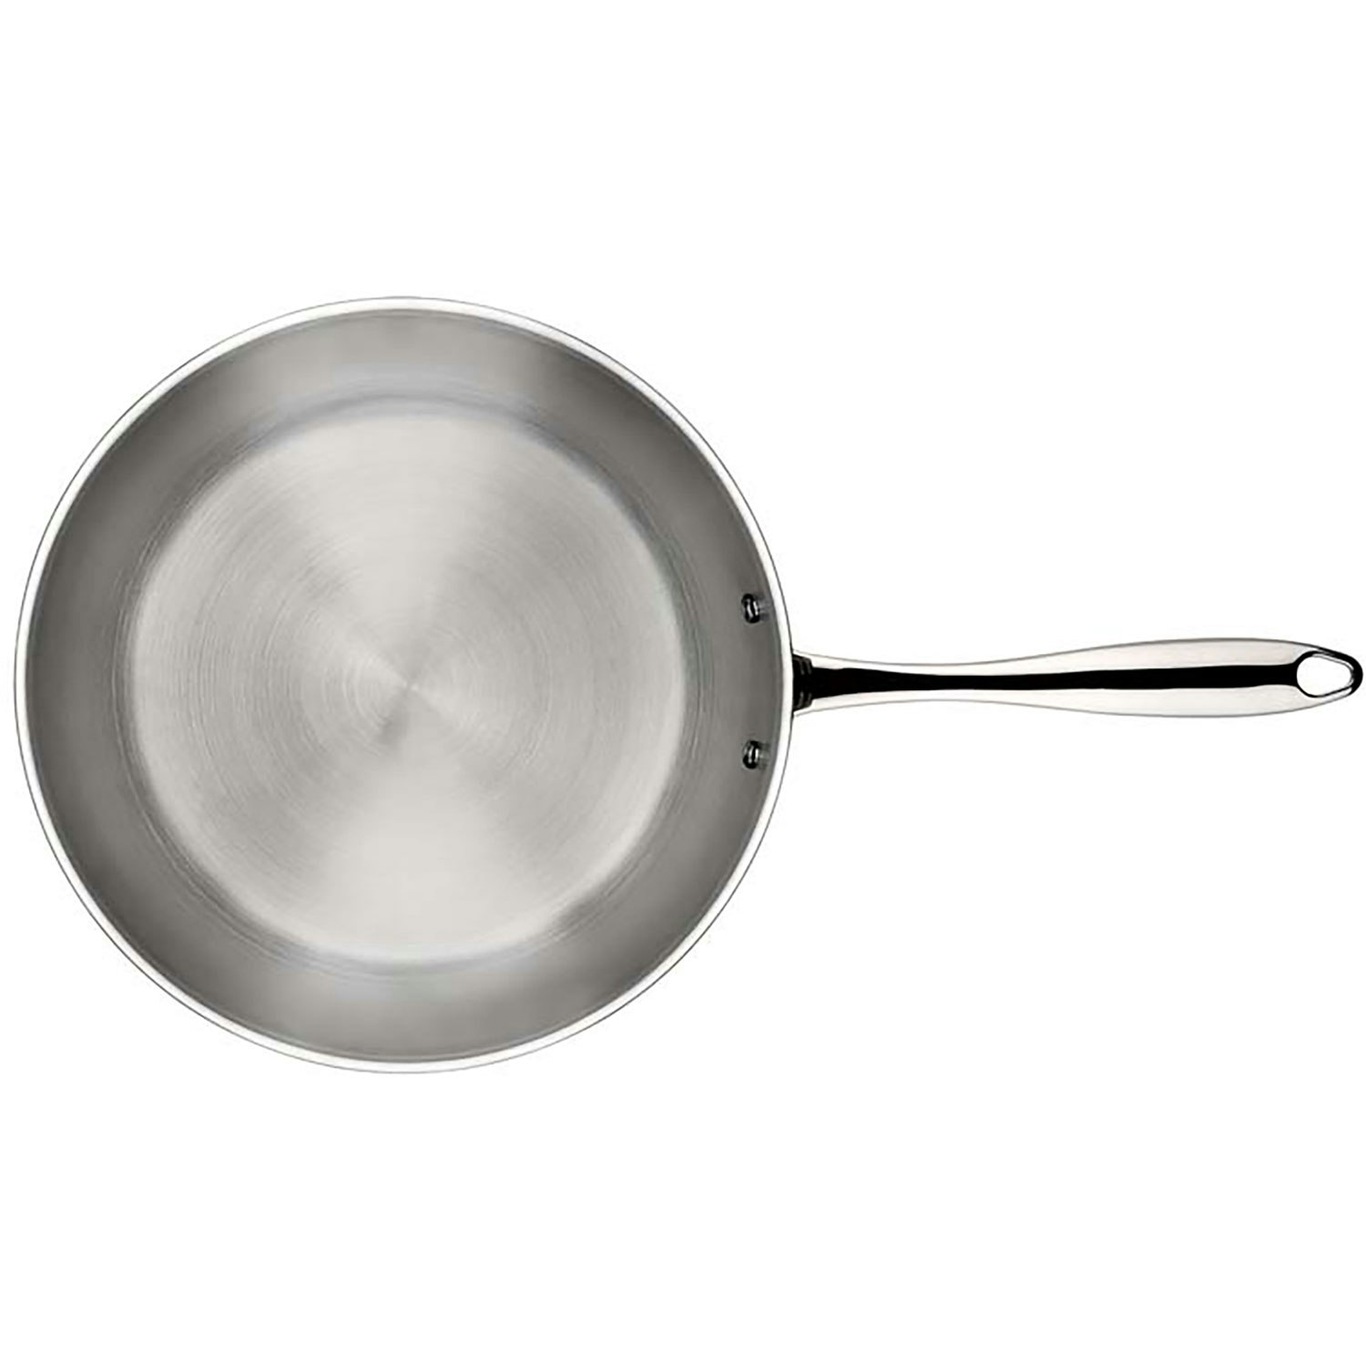 https://royaldesign.com/image/2/heirol-steely-frying-pan-28-cm-in-stainless-steel-1?w=800&quality=80